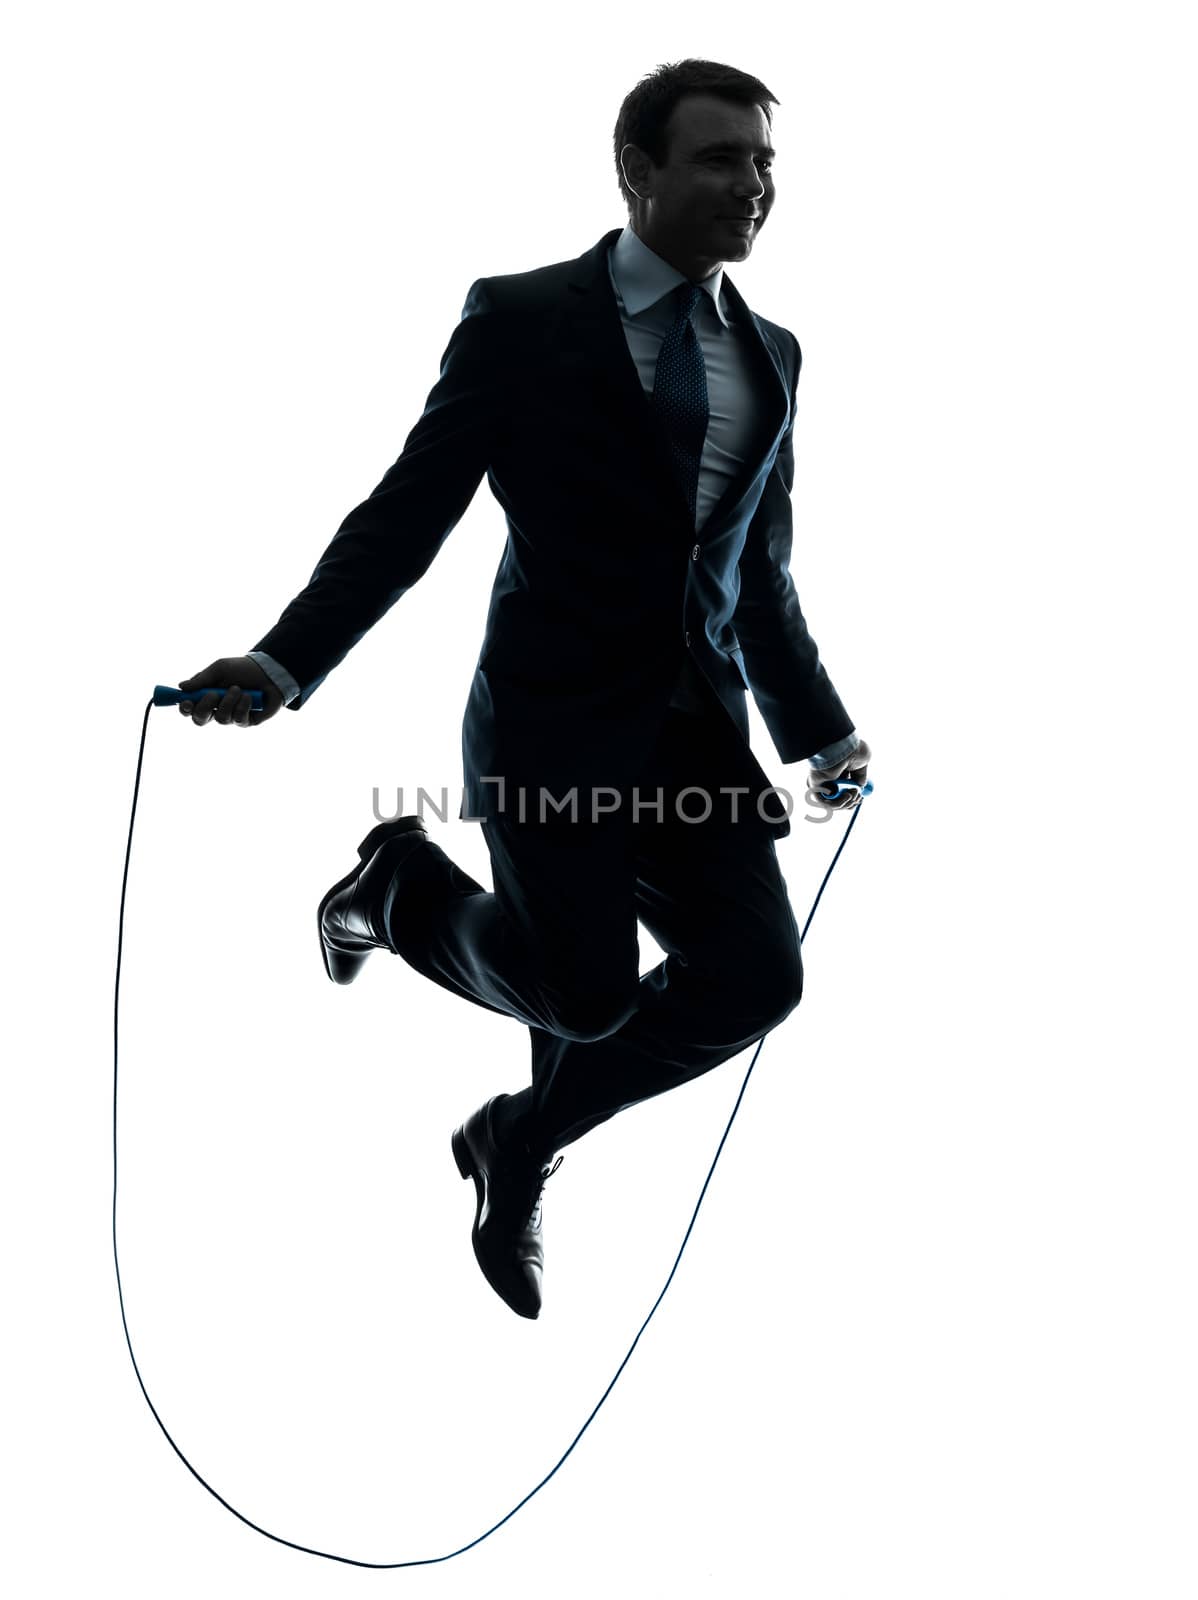 business man exercising jumping rope silhouette by PIXSTILL